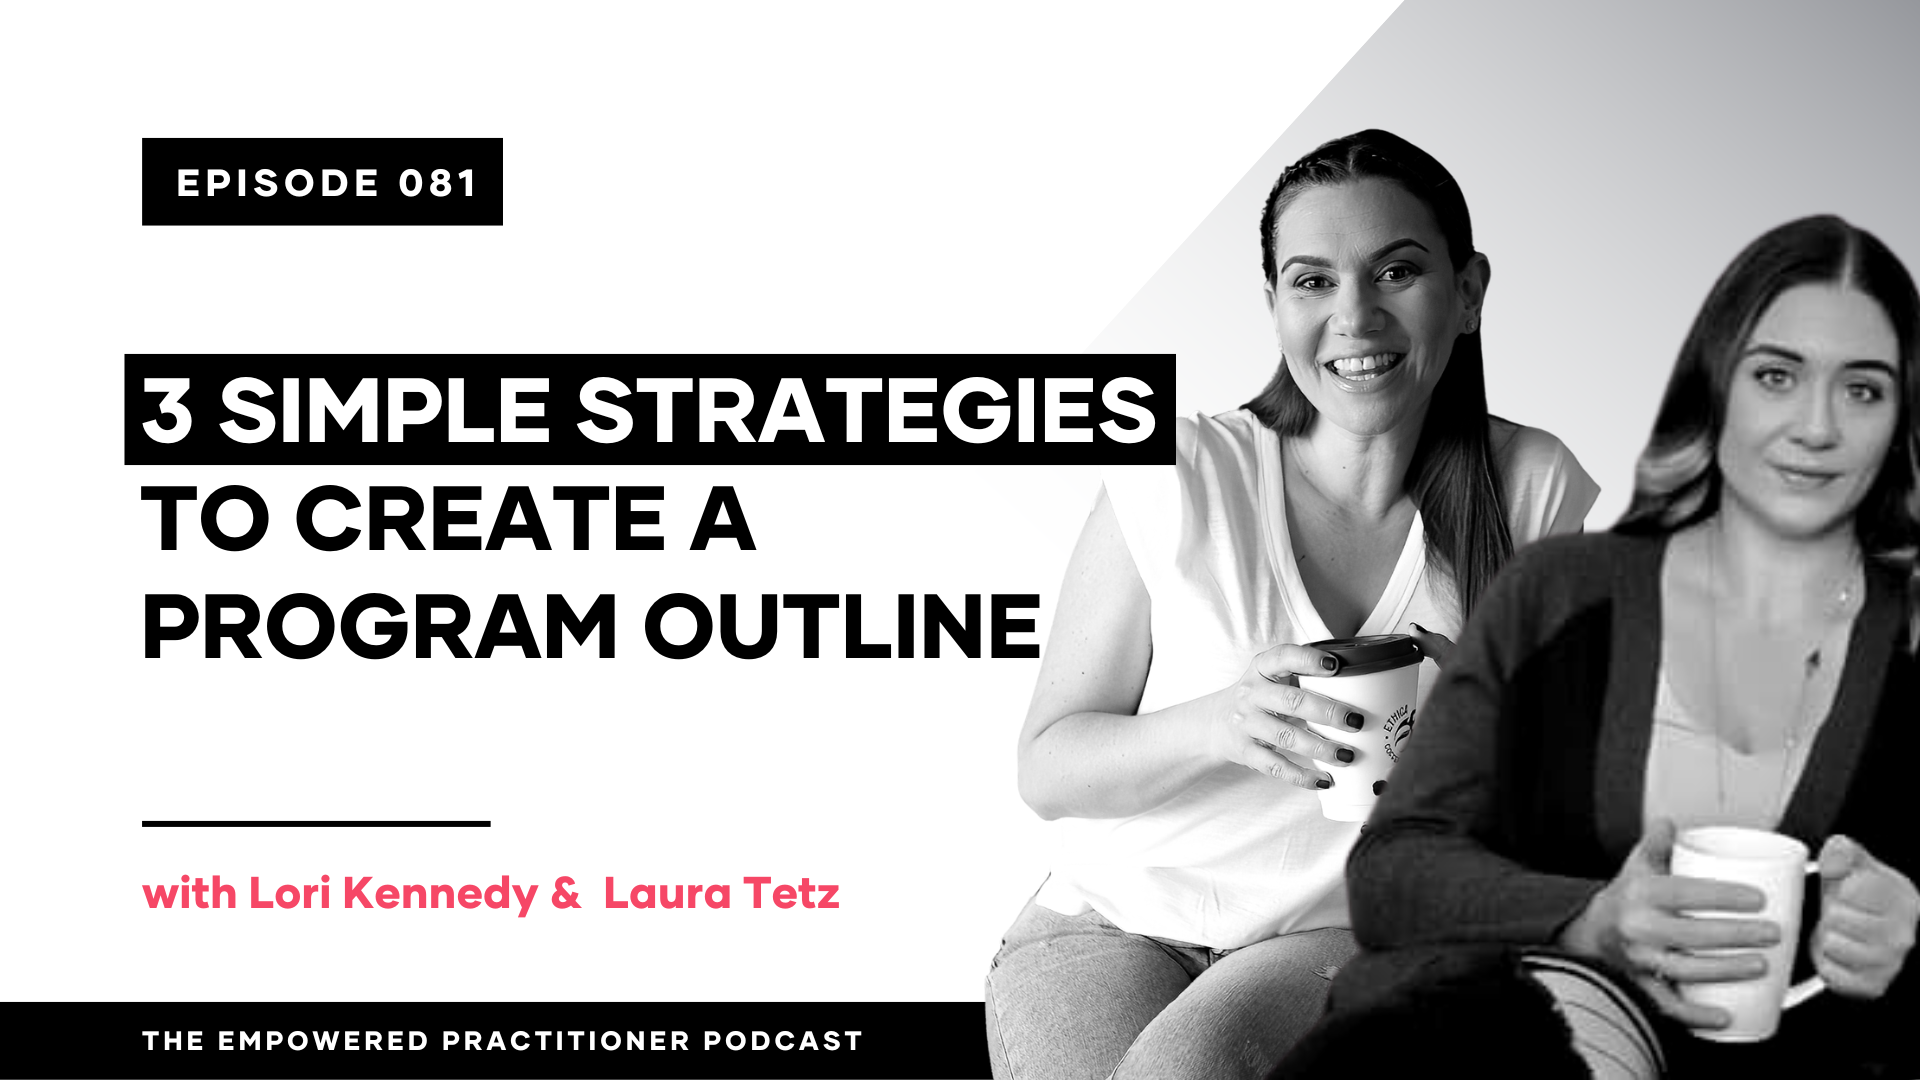 3 Simple Strategies To Create A Program Outline